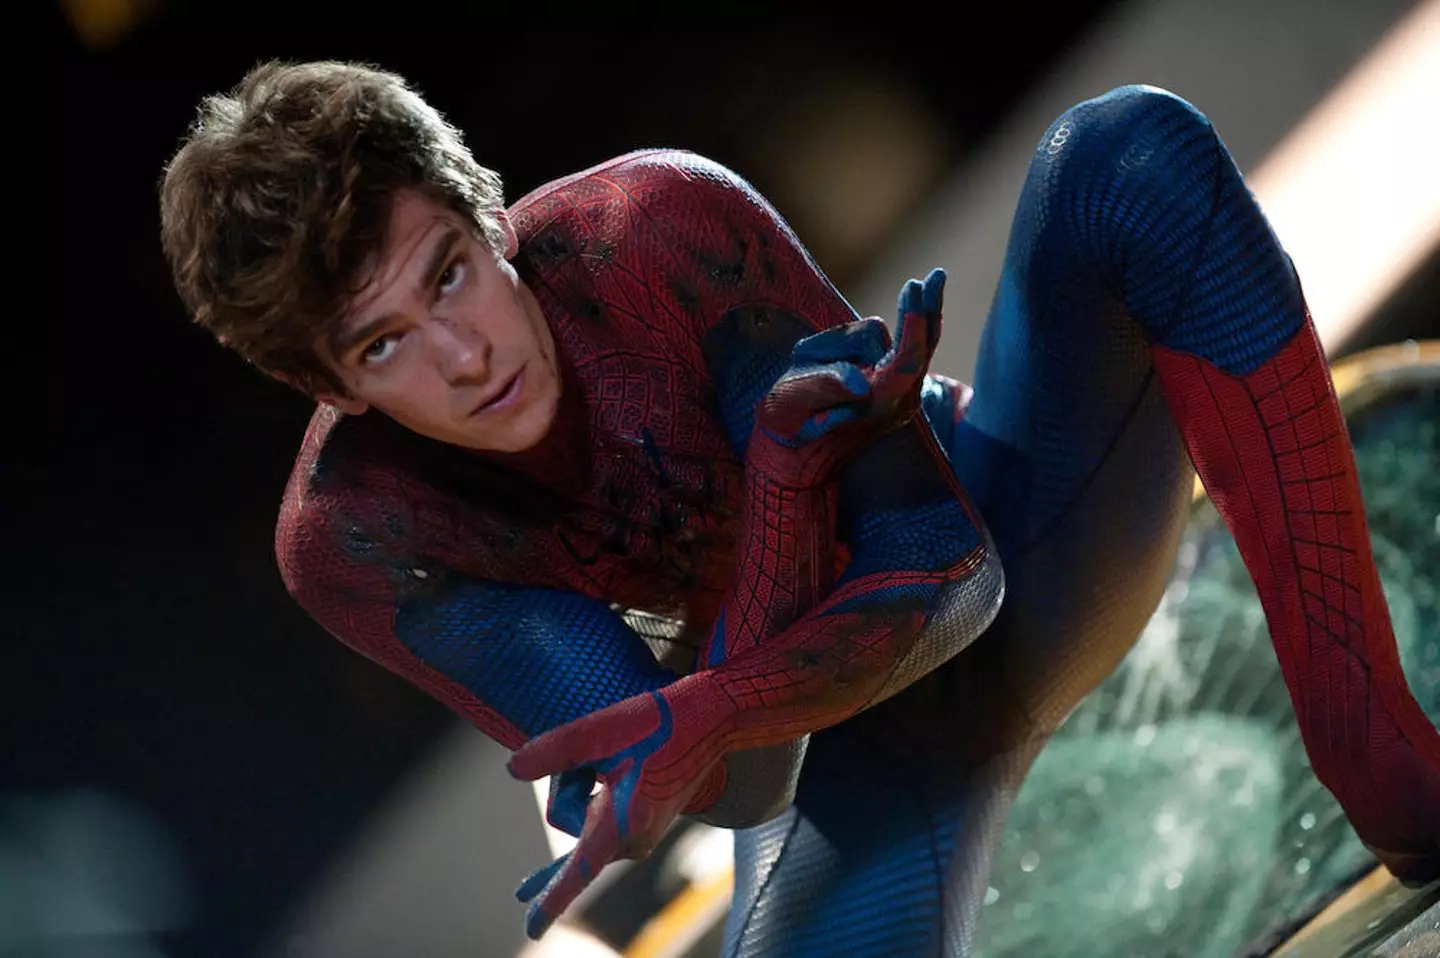 The actor reprised his role as Peter Parker in Spider-Man: No Way Home.